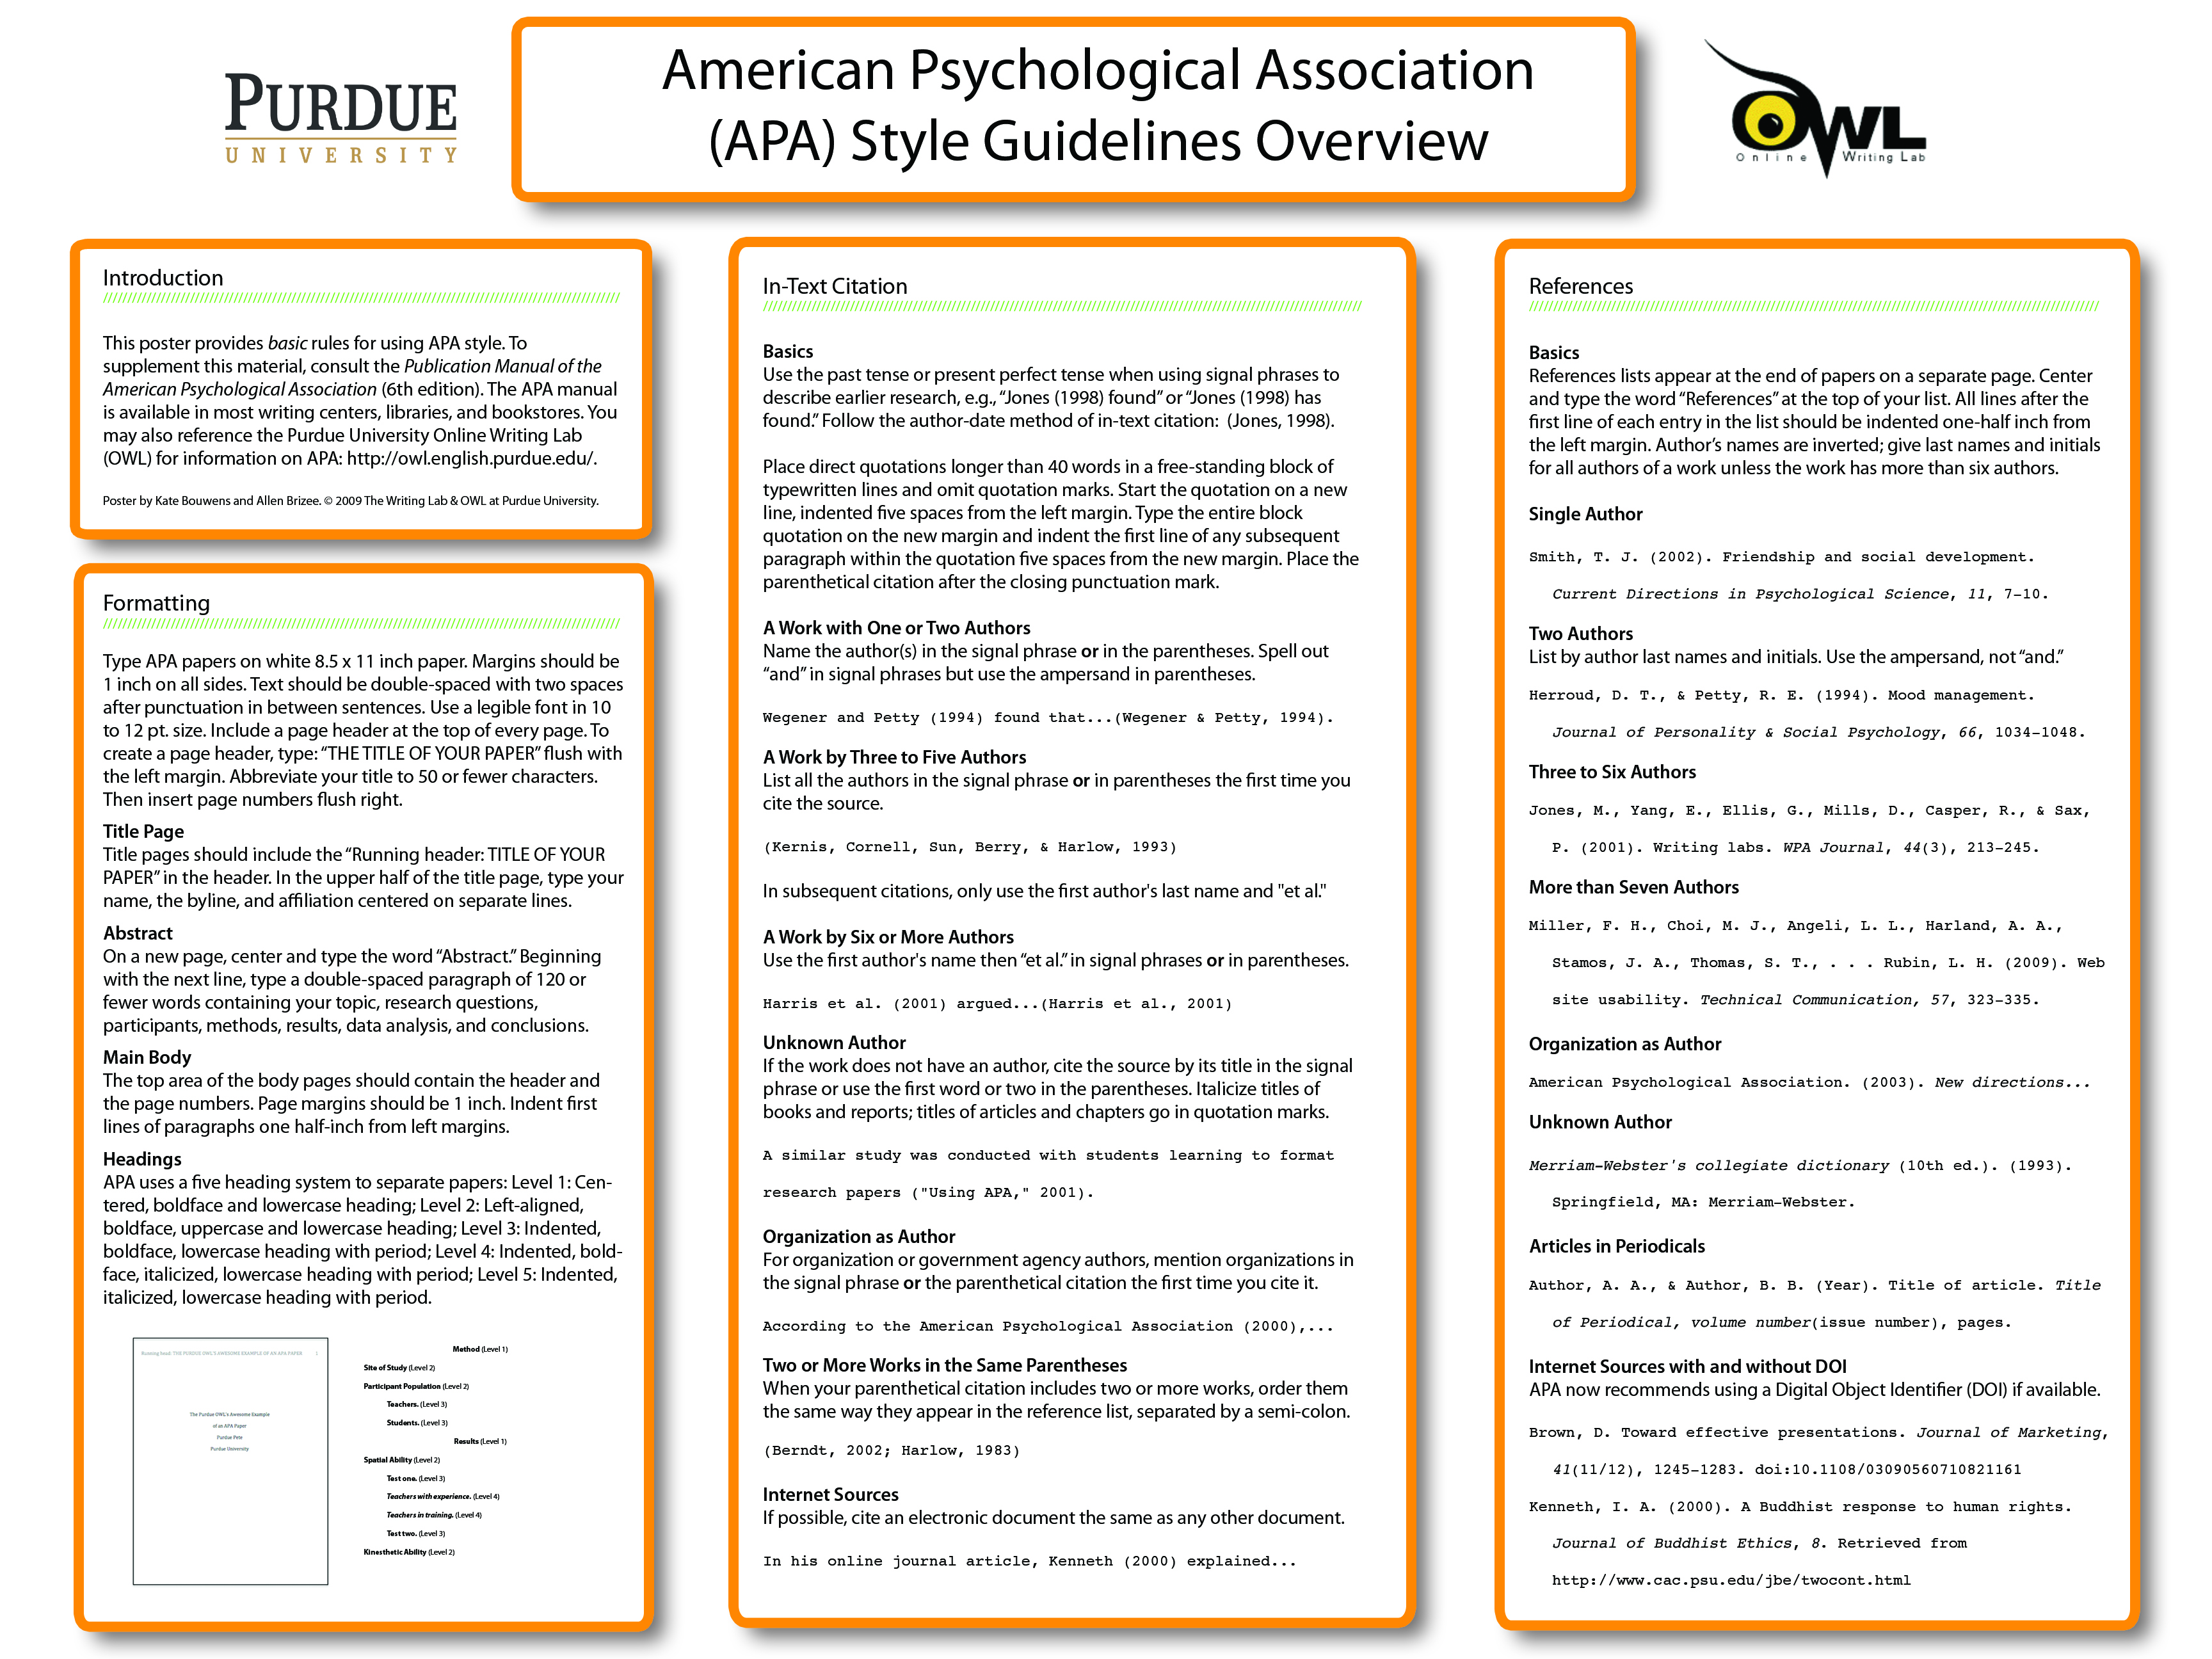 Styles of apa papers